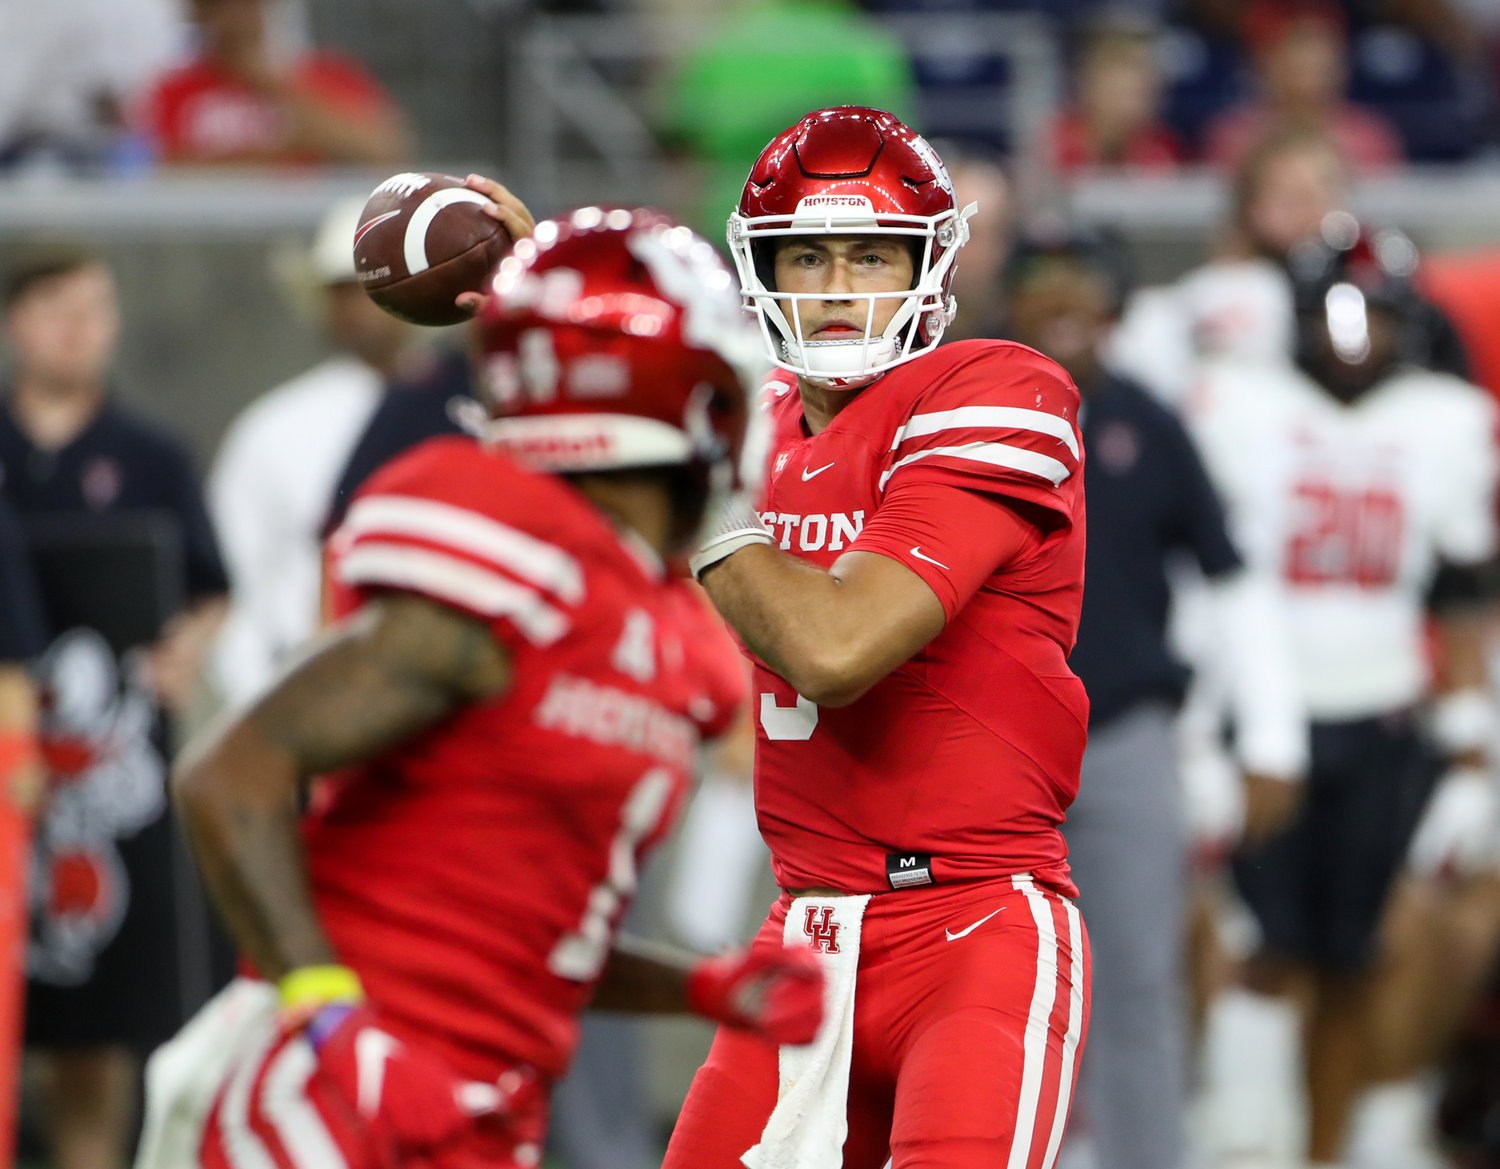 Houston Cougars quarterback Clayton Tune (3) looks to pass during an NCAA football game between Houston and Texas Tech on September 4, 2021 in Houston, Texas.